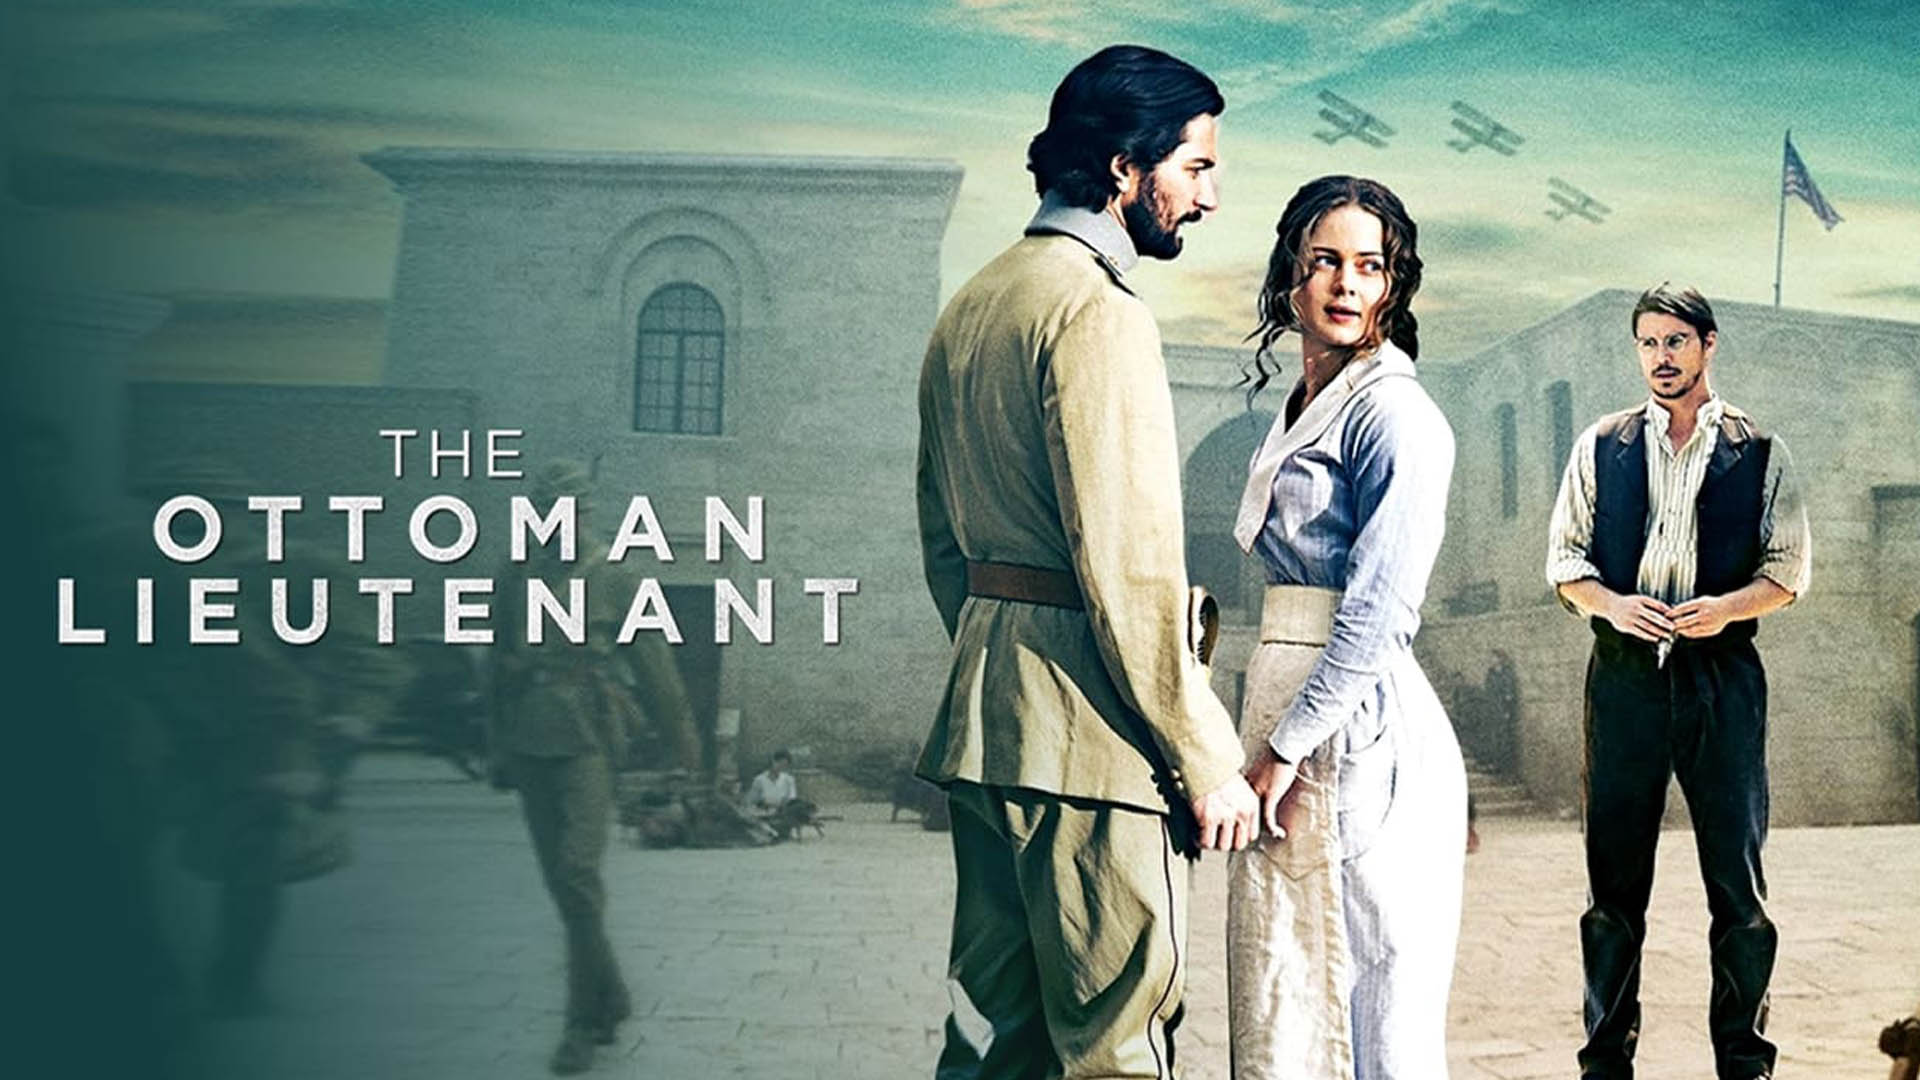 The main characters of the movie The Ottoman Lieutenant